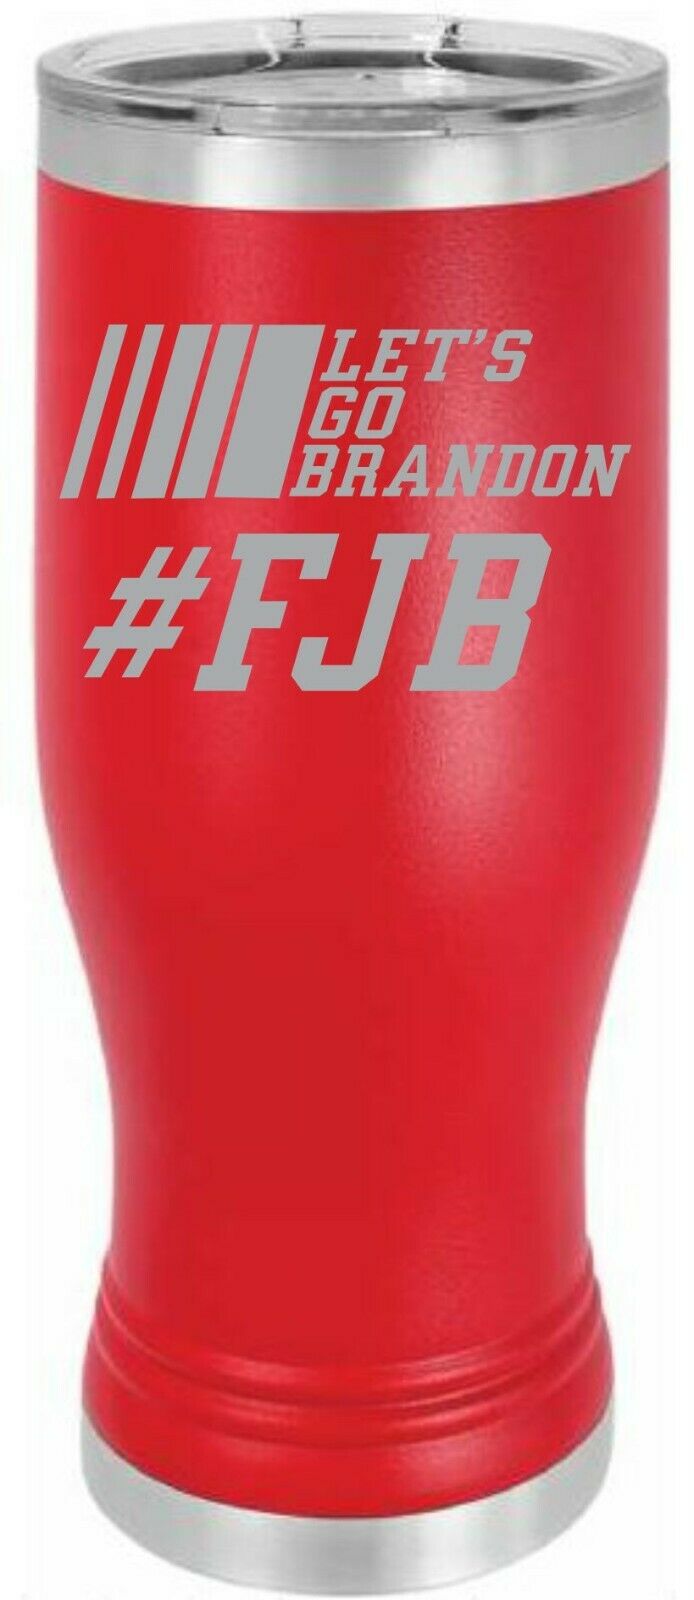 Let's Go Brandon Engraved Pilsner Cup - CLEARANCE PINK, RED OR BLACK Limited Qty